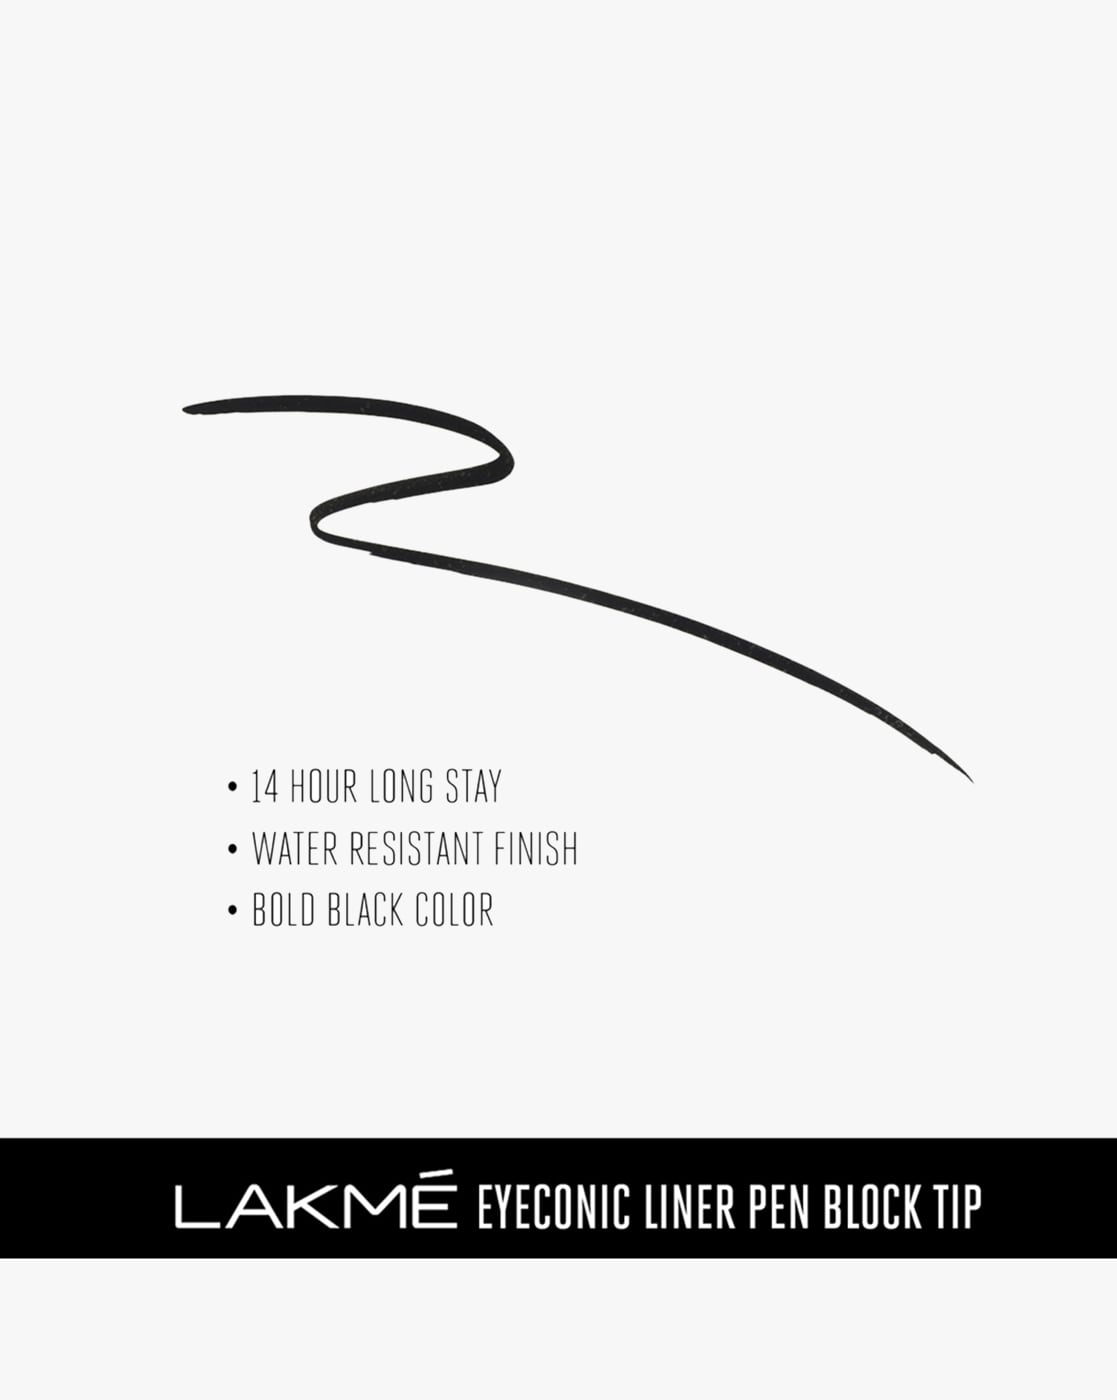 Six things to love about Lakmé India's biggest make-up brand | Unilever